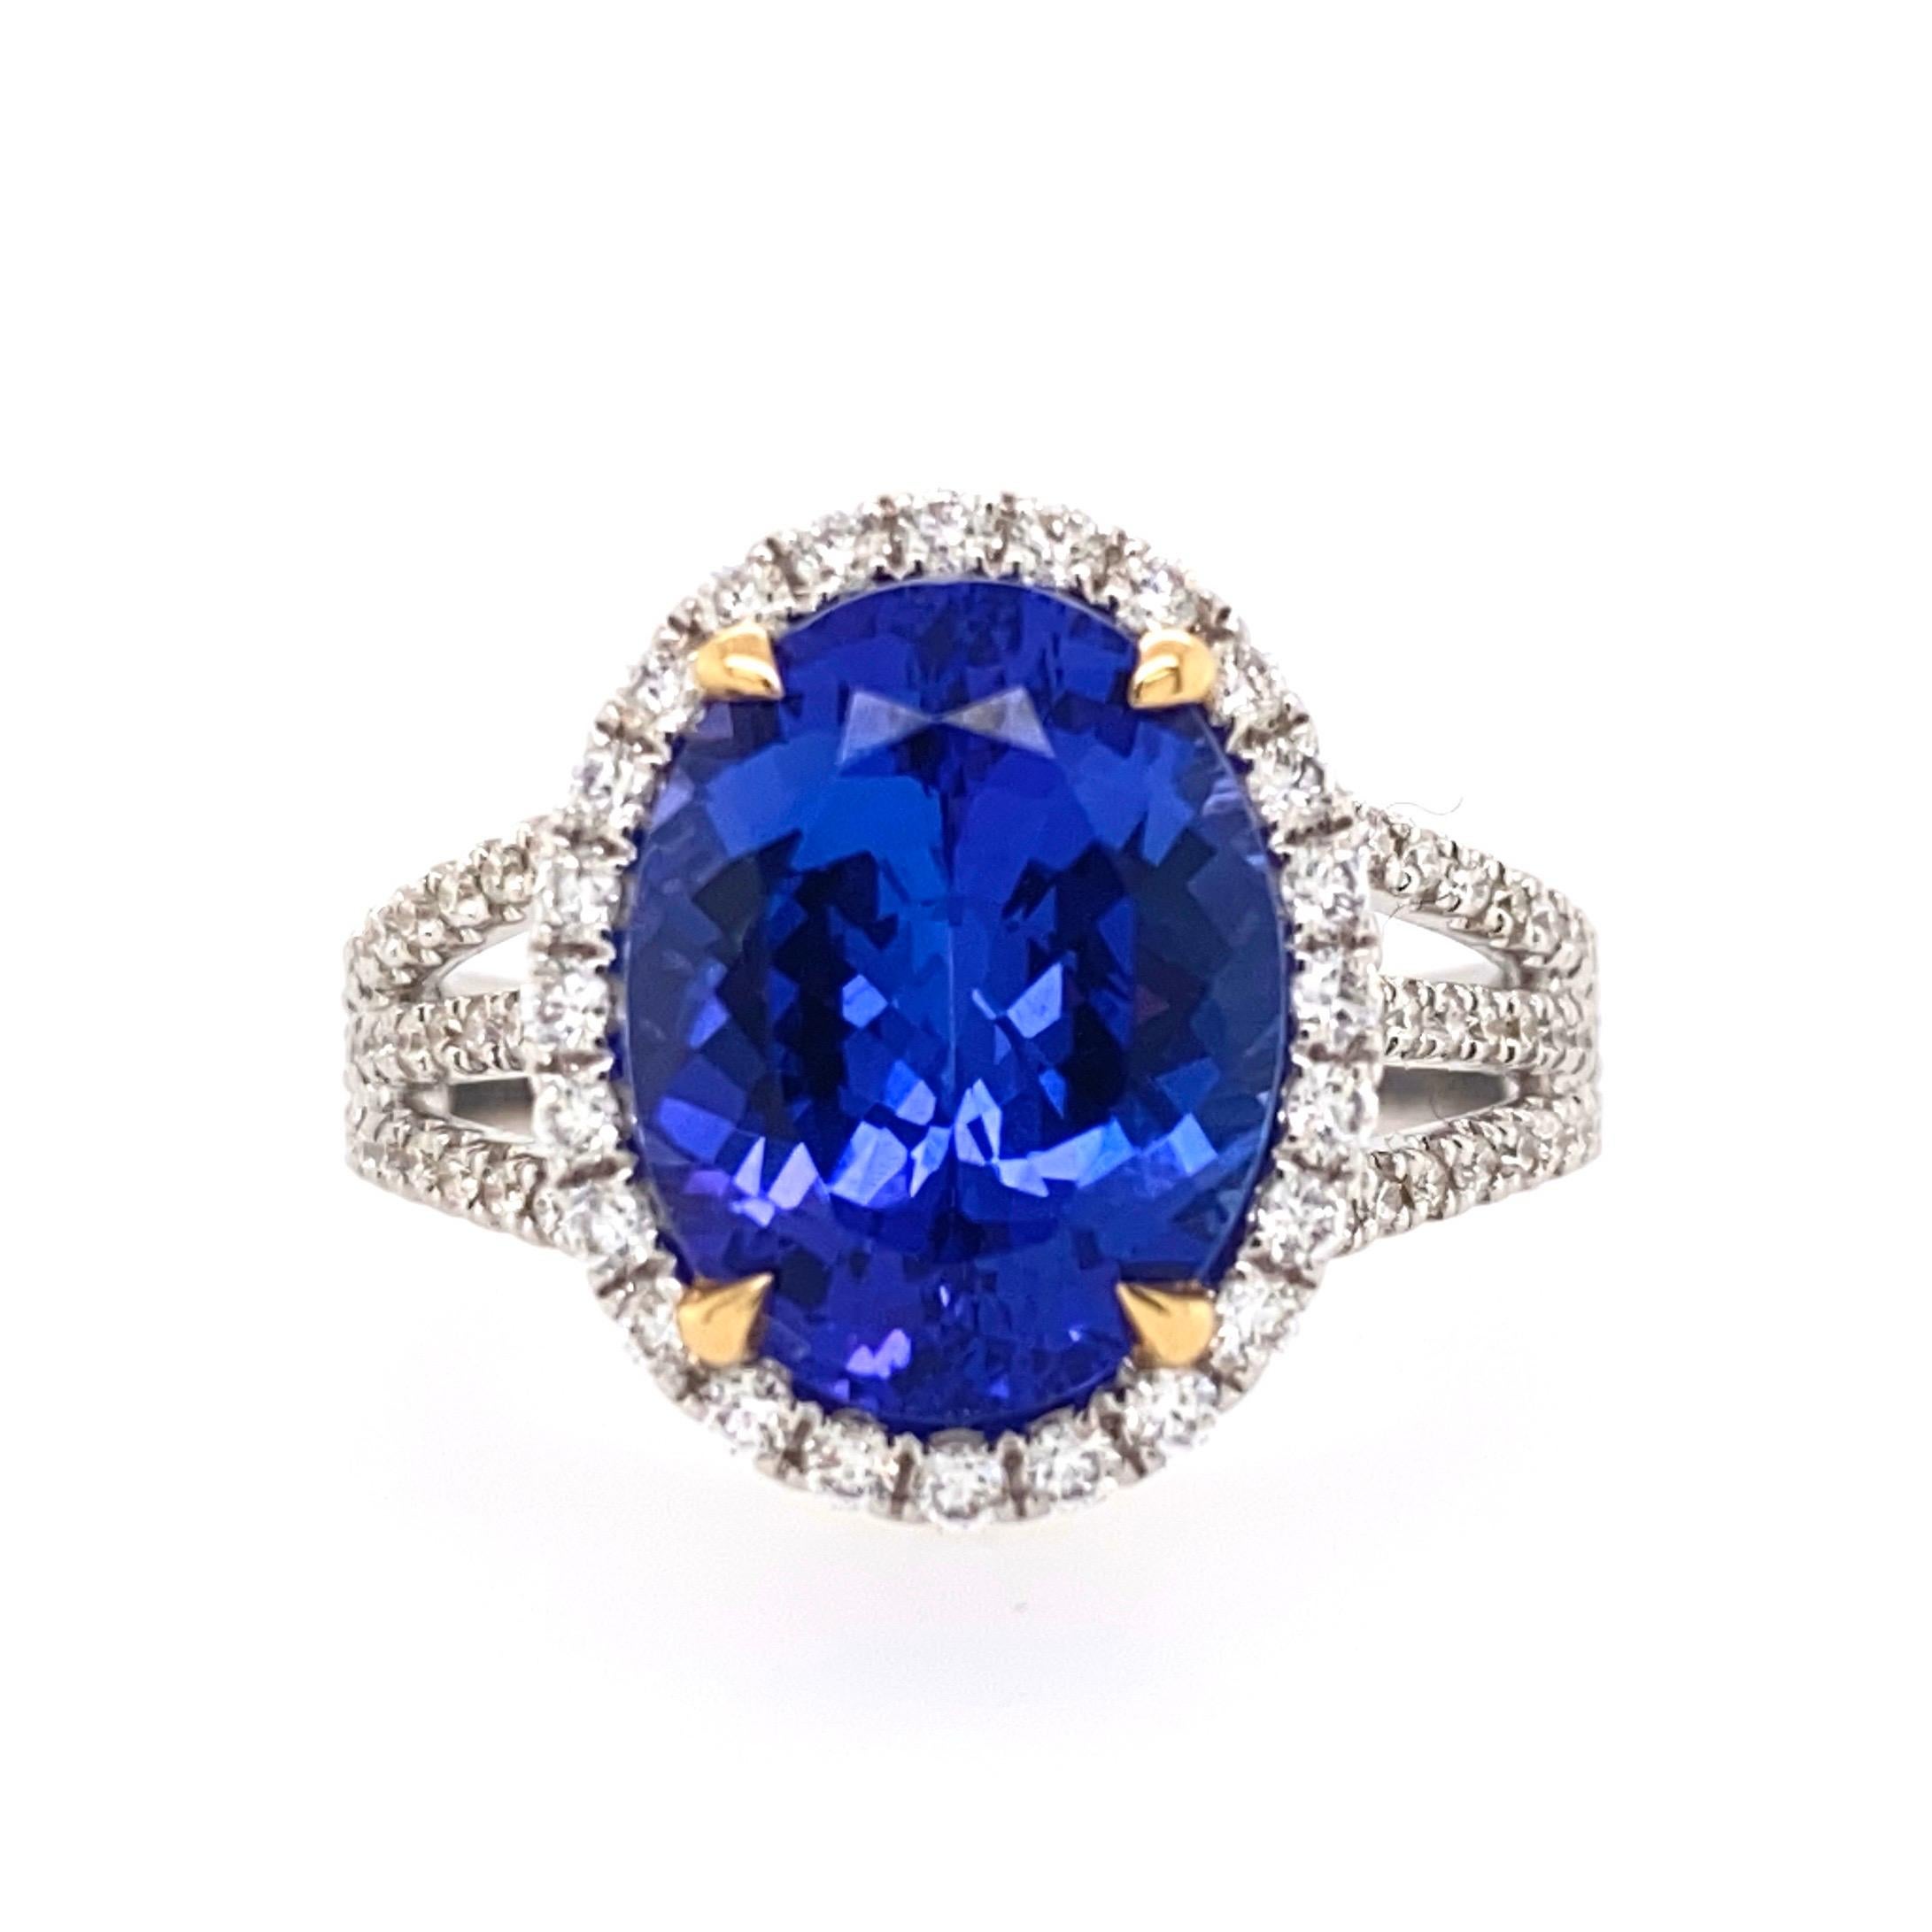 This beautiful cocktail ring features a stunning 5.12 Carat Oval Tanzanite with a Diamond Halo. The Tanzanite is on a Triple Diamond Shank. This Ring is set in 18k White Gold, with 18k Yellow Gold prongs on the center stone. Total Diamond Weight =